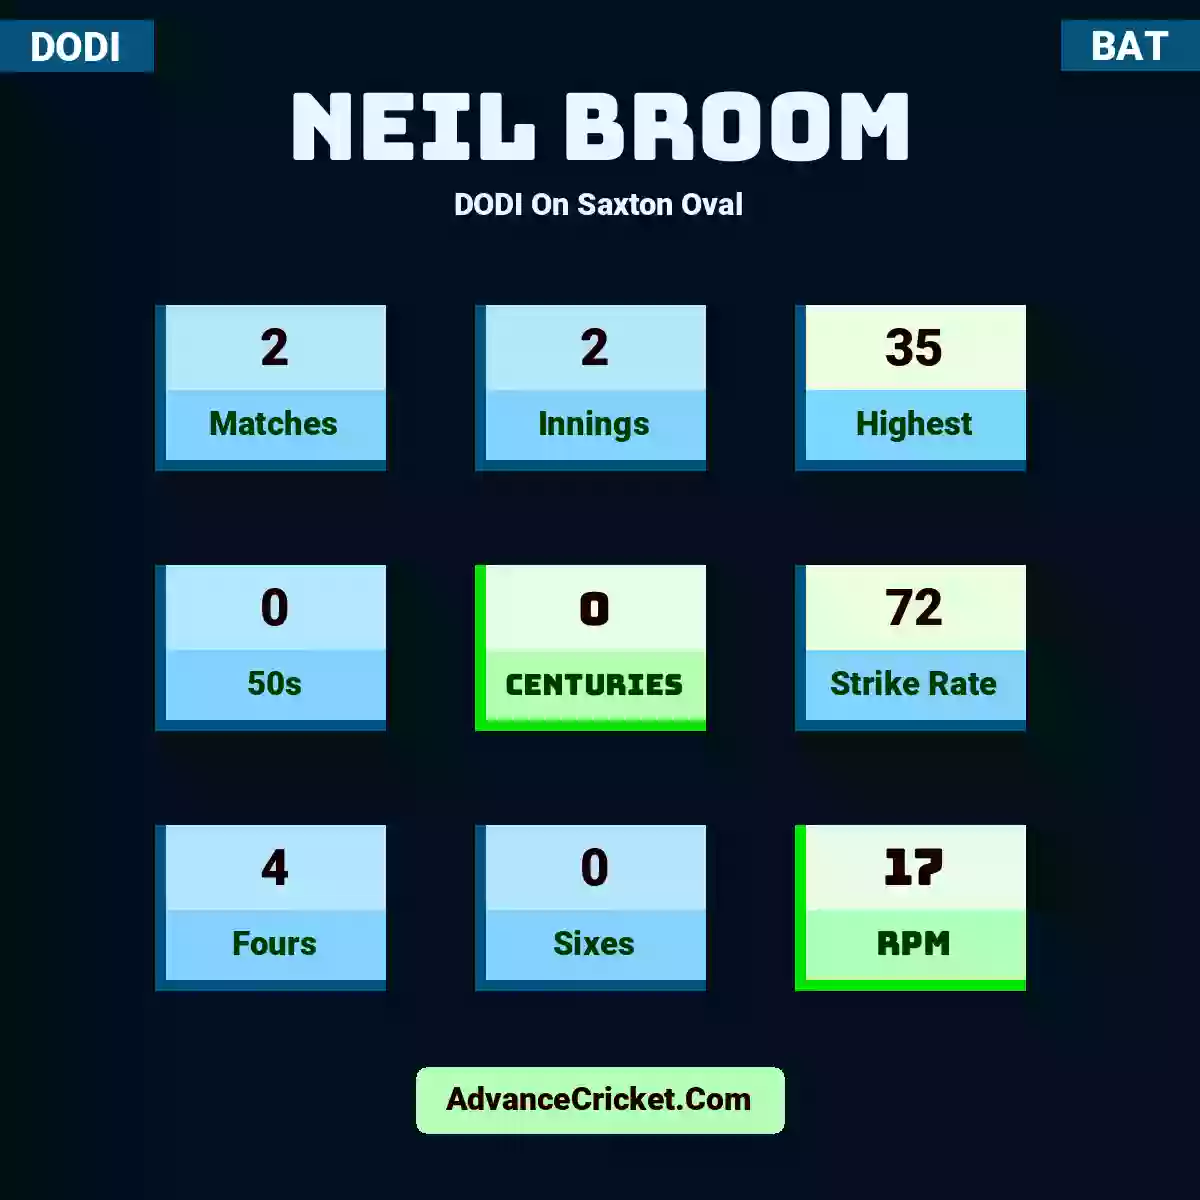 Neil Broom DODI  On Saxton Oval, Neil Broom played 2 matches, scored 35 runs as highest, 0 half-centuries, and 0 centuries, with a strike rate of 72. N.Broom hit 4 fours and 0 sixes, with an RPM of 17.